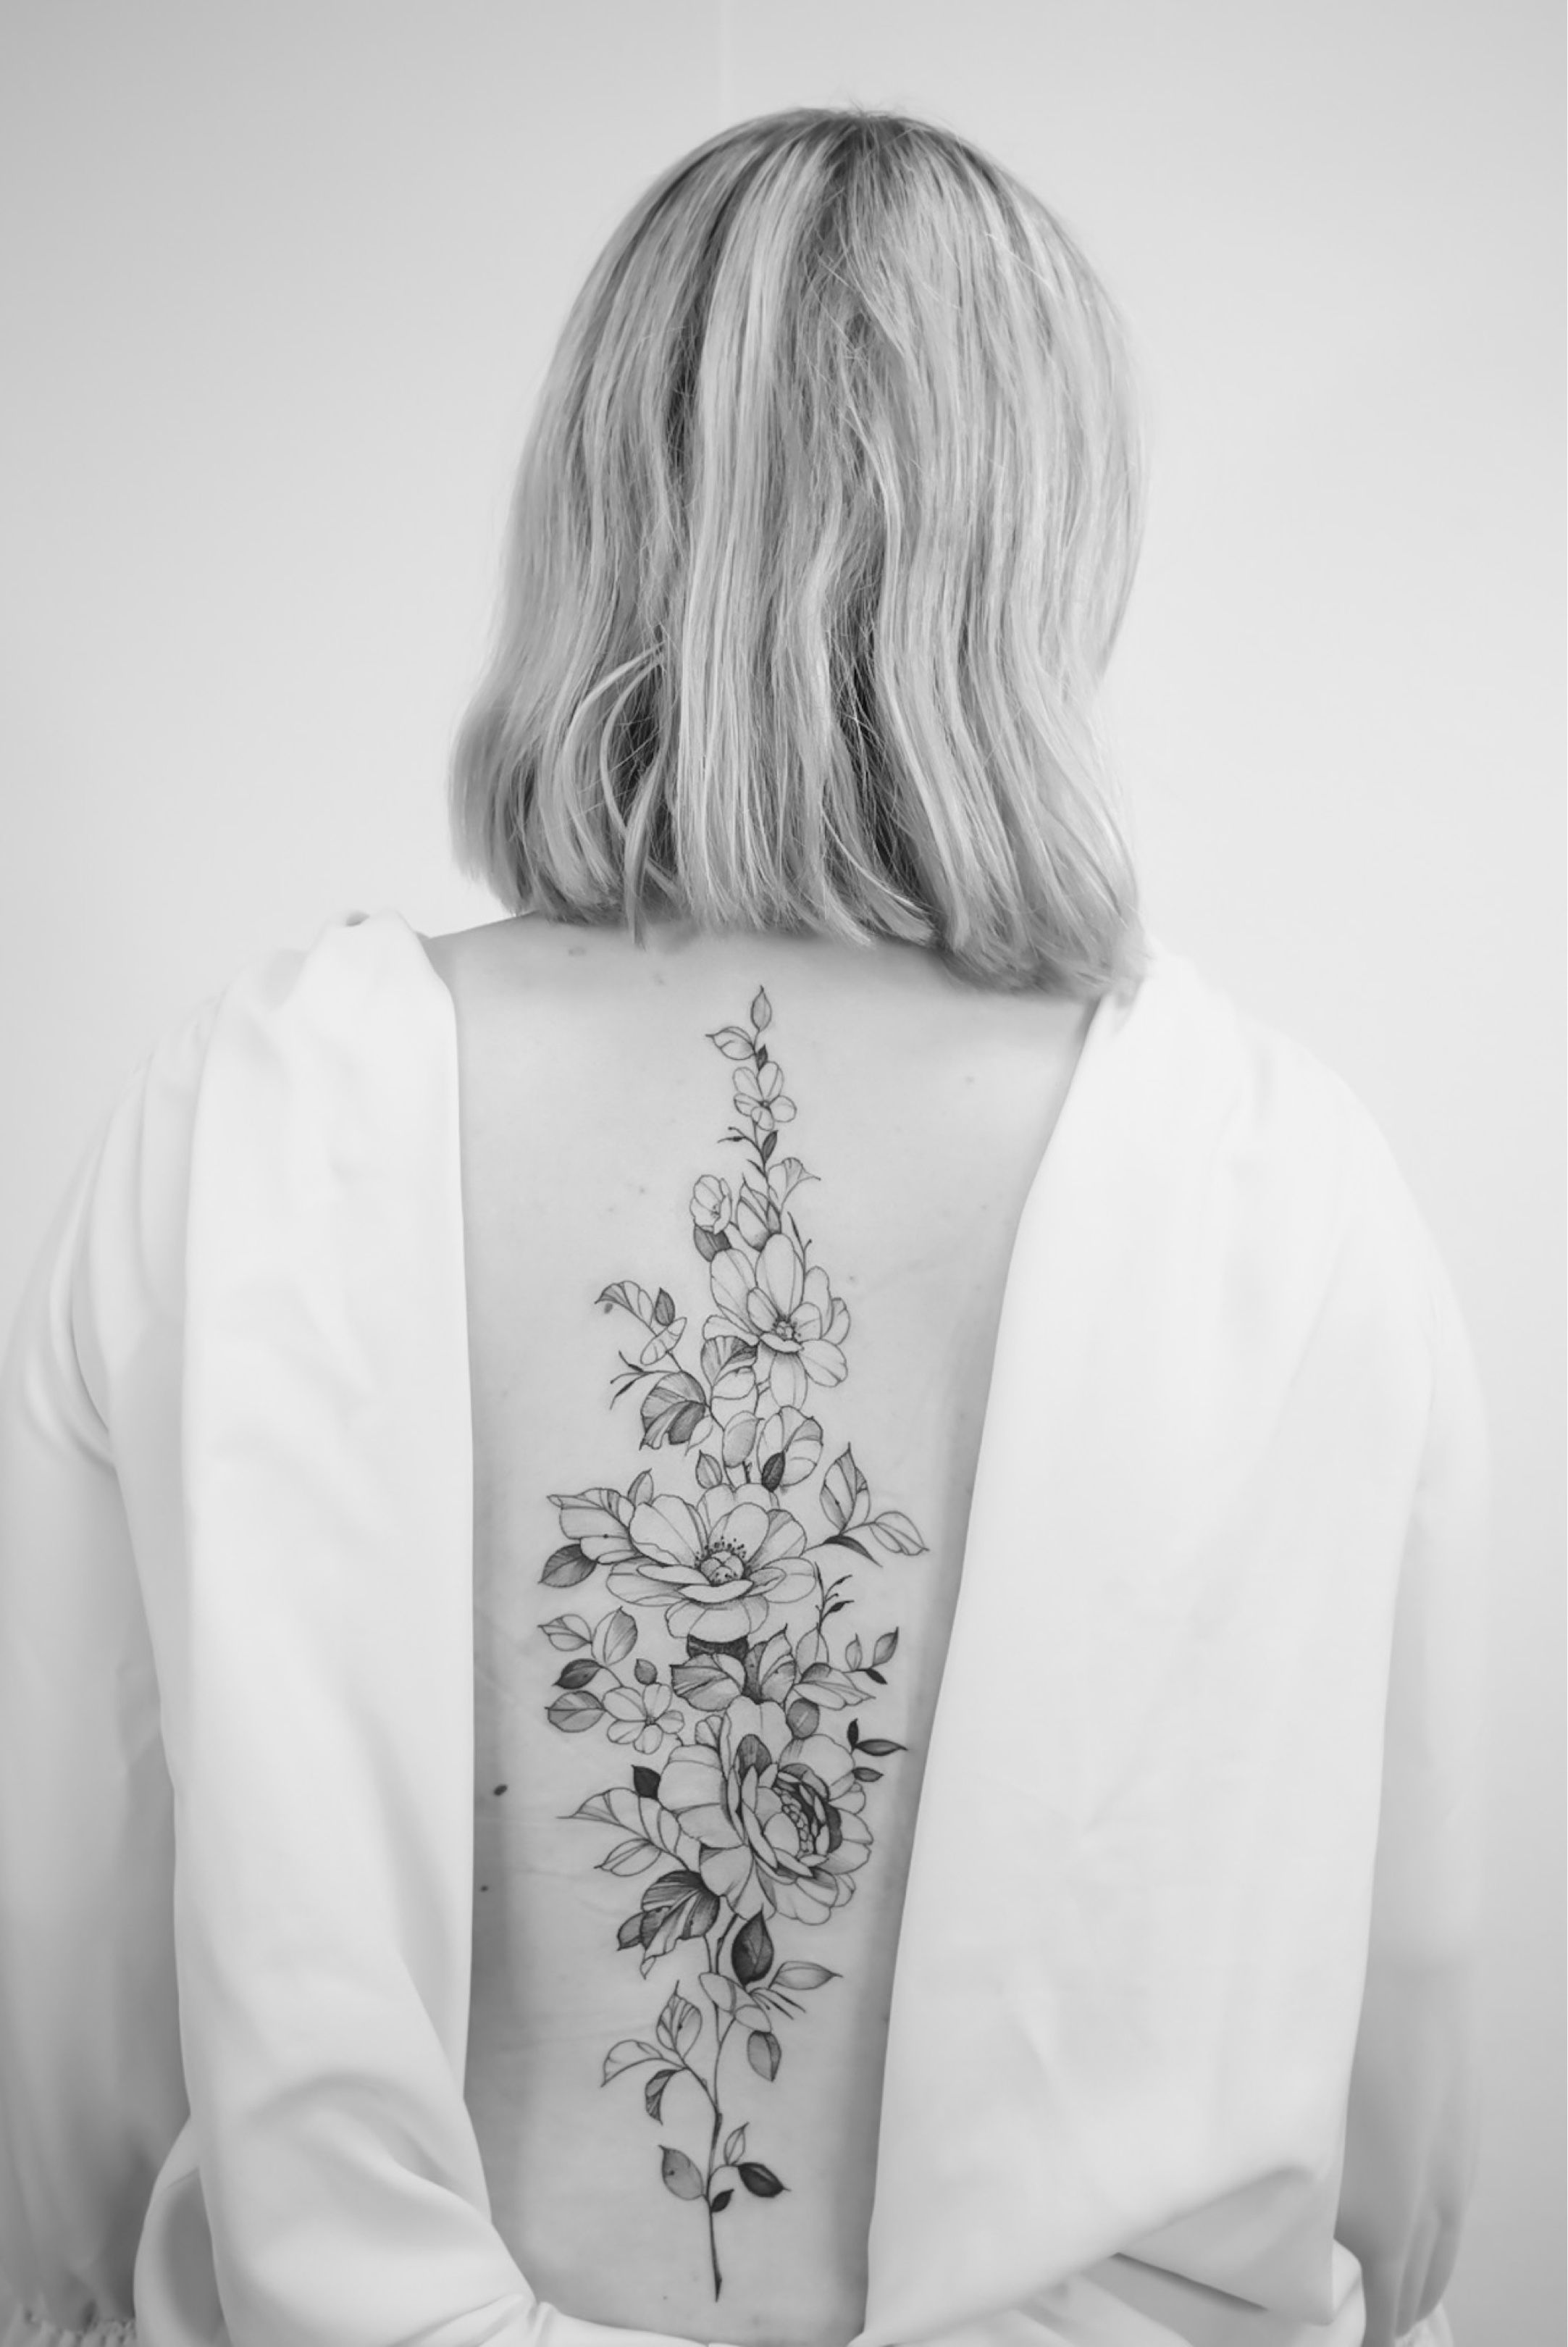 40 Spine Tattoos Ideas Help Your Express Yourself Bravely  neartattoos